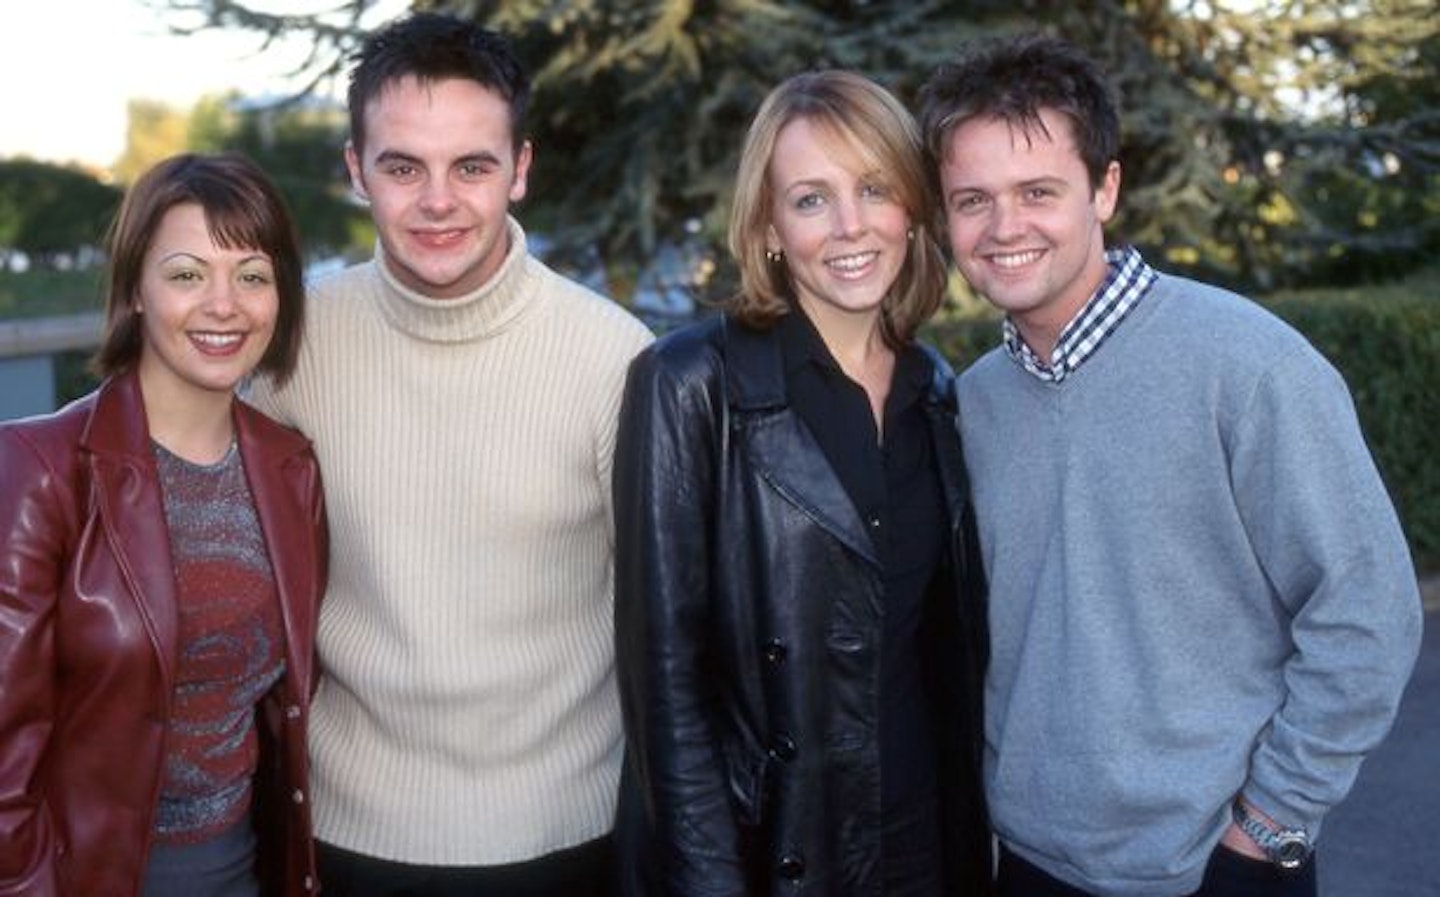 Lisa Armstrong, Ant McPartlin and Declan Donnelly